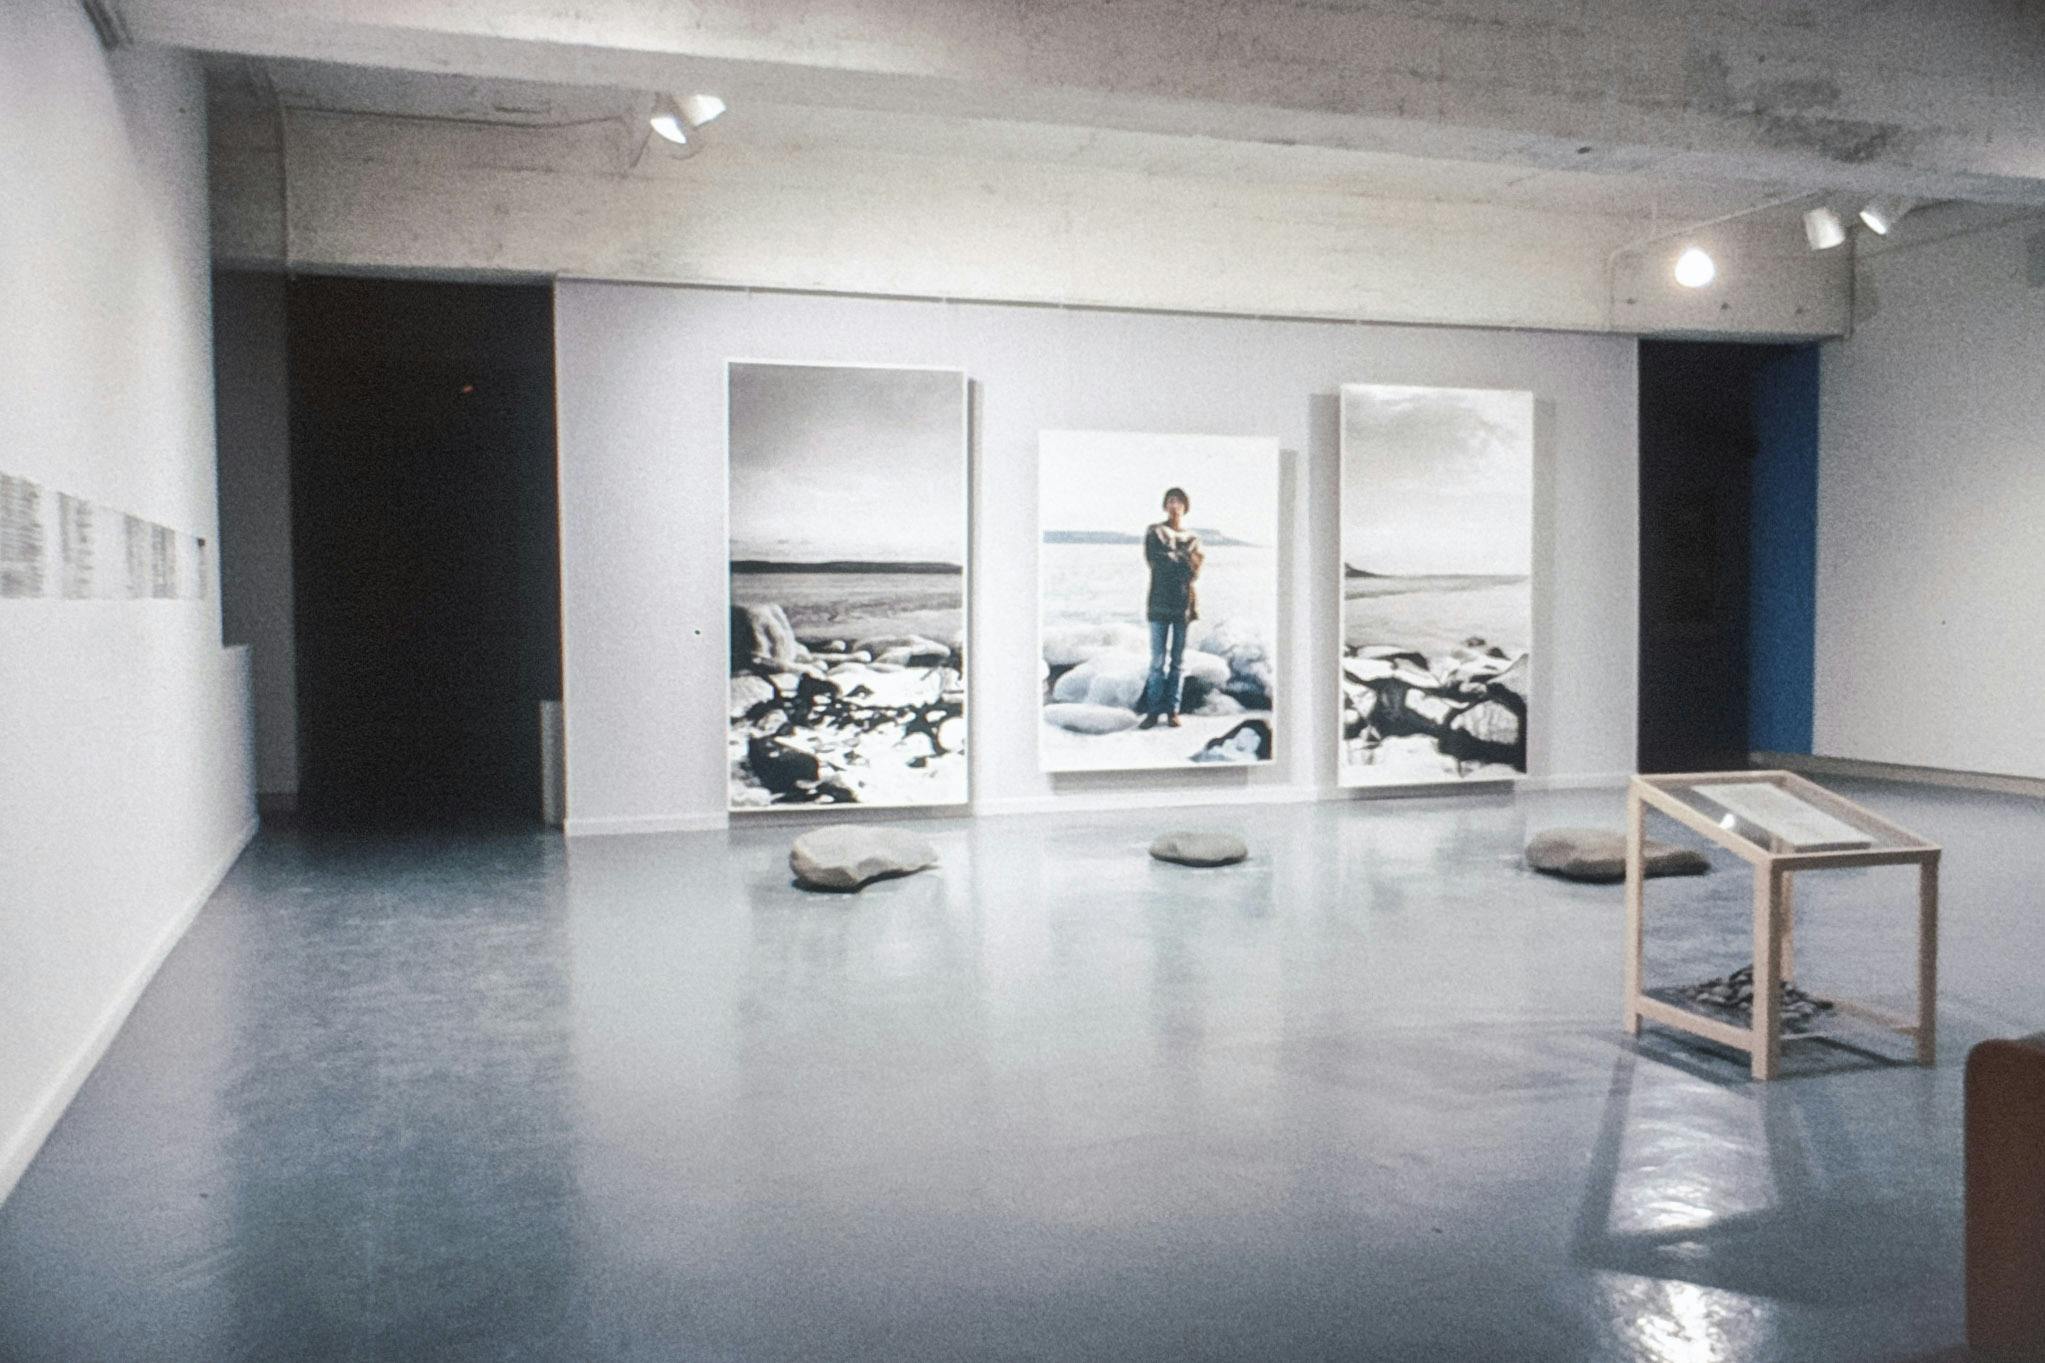 A gallery with several artworks on the walls and floor, including 3 life-scale photos. A colour photo shows a person standing on a rocky shore, dressed warmly. The other 2 show the rest of the shore.